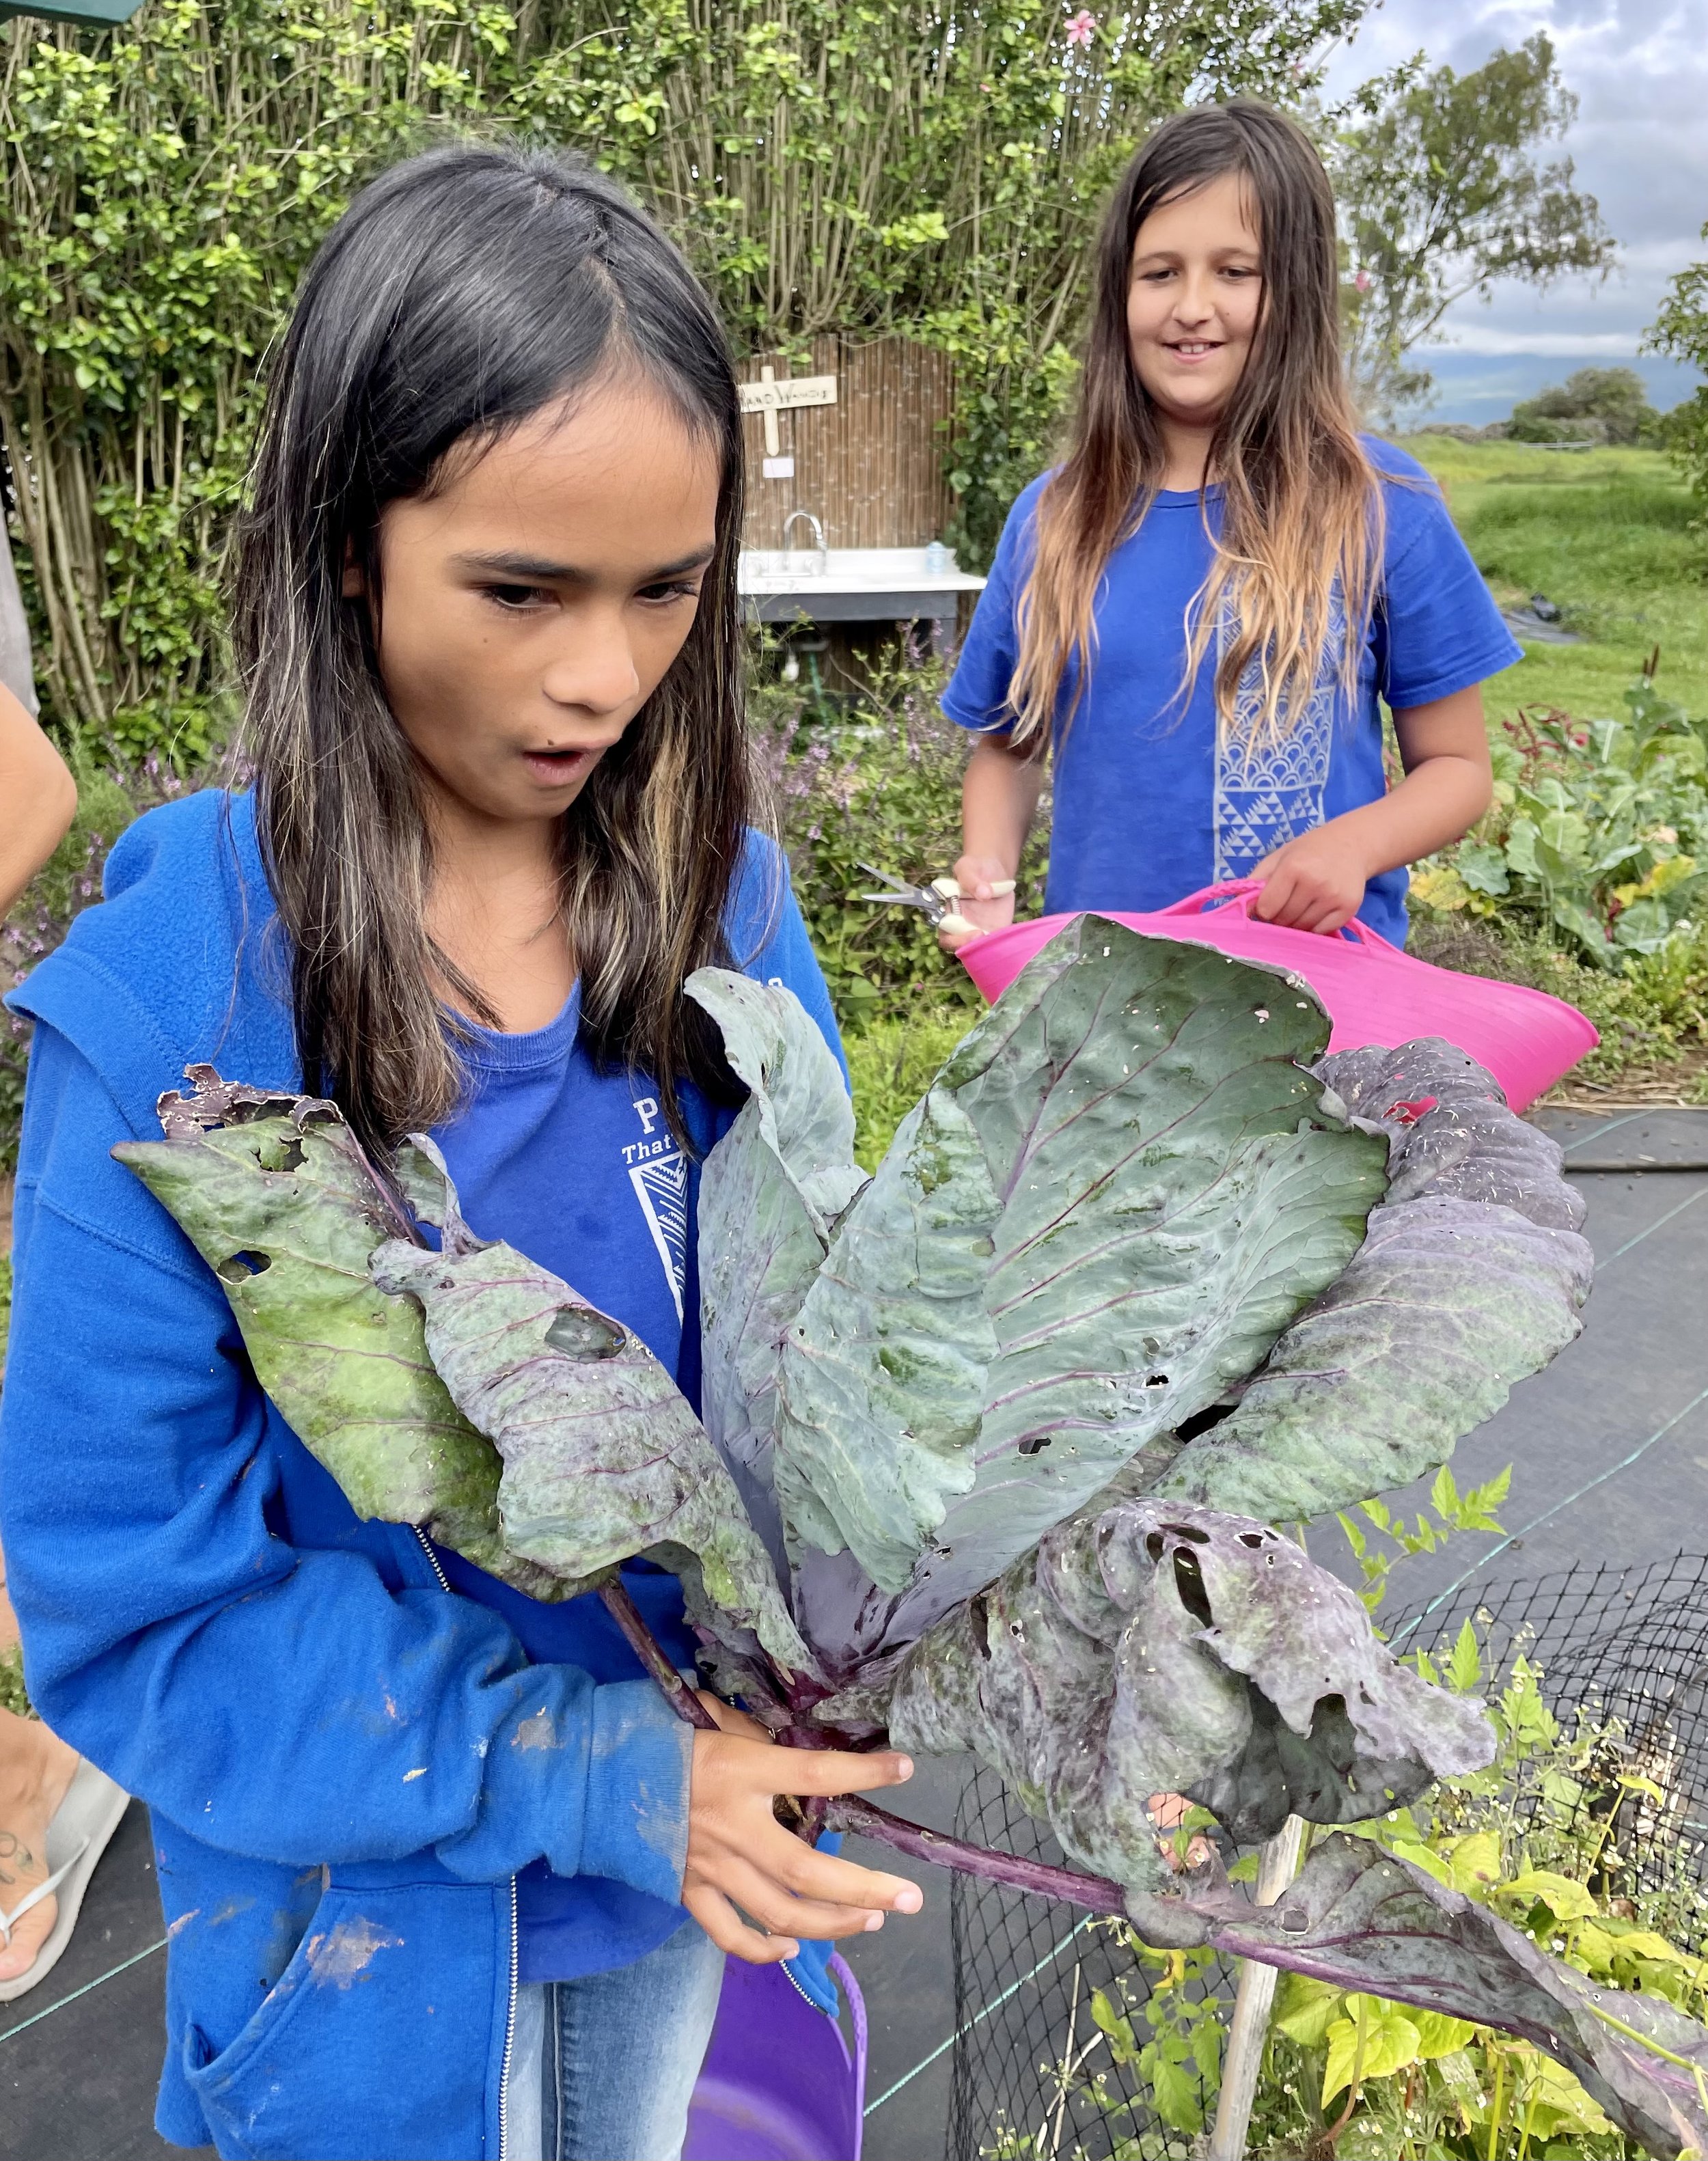 Giselle and Neveah Harvesting Cabbage.jpg